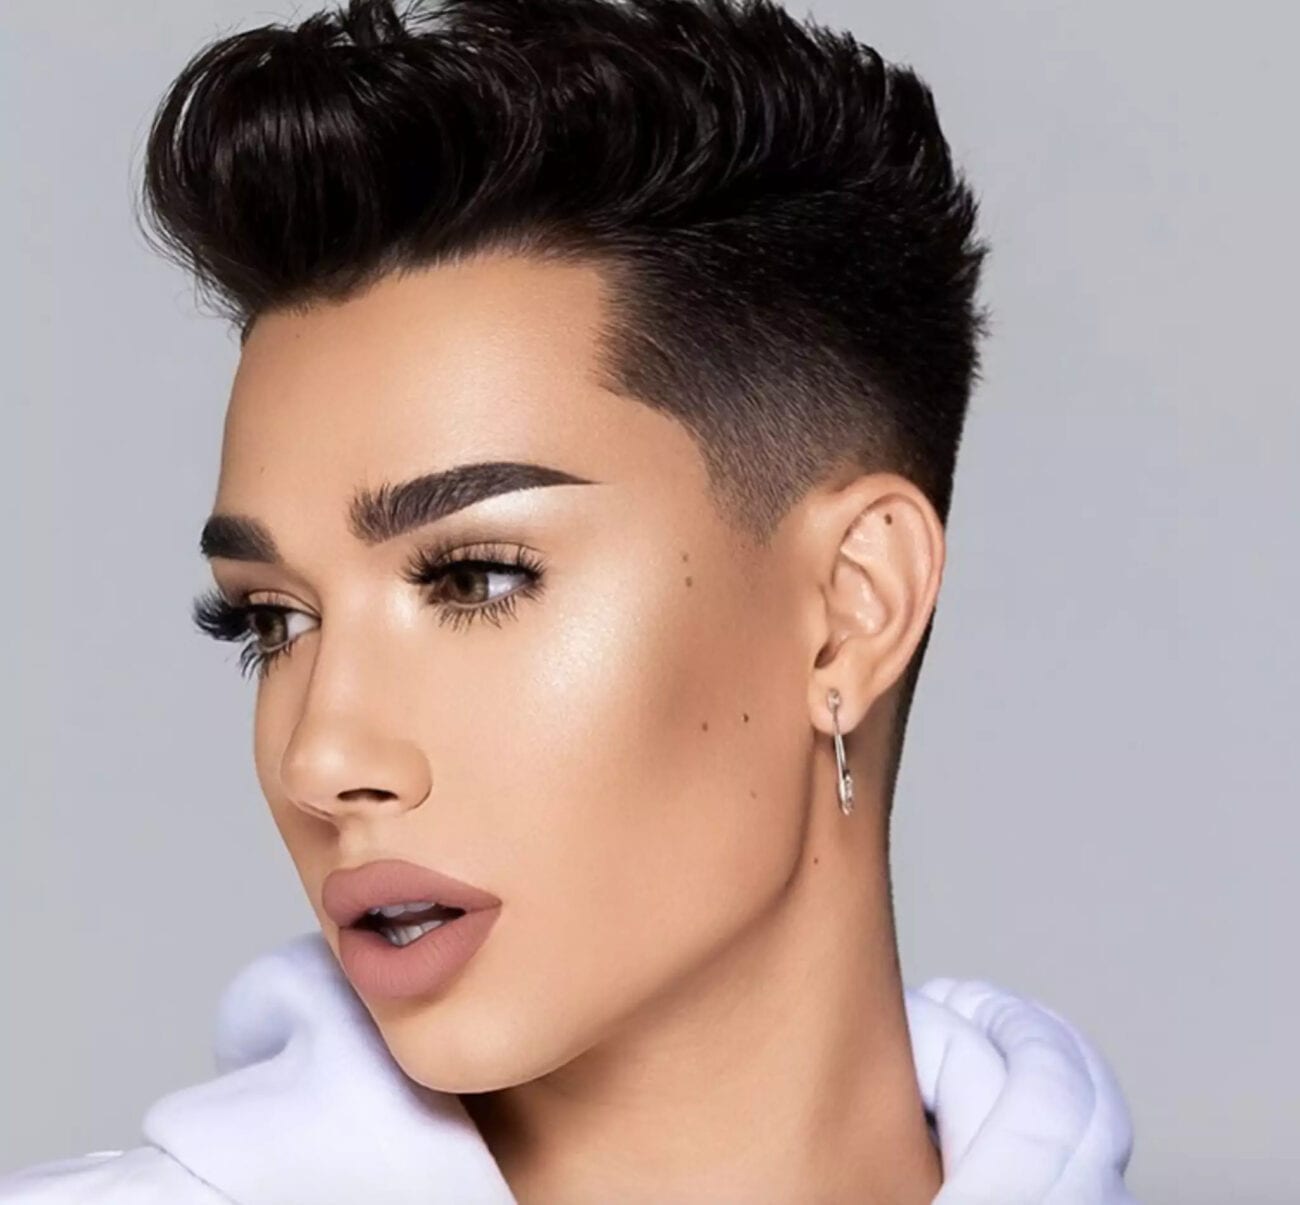 James Charles is known for getting into online drama. Recently he subtweeted Alicia Keys. Let's look at all the times he's been shady on Twitter.